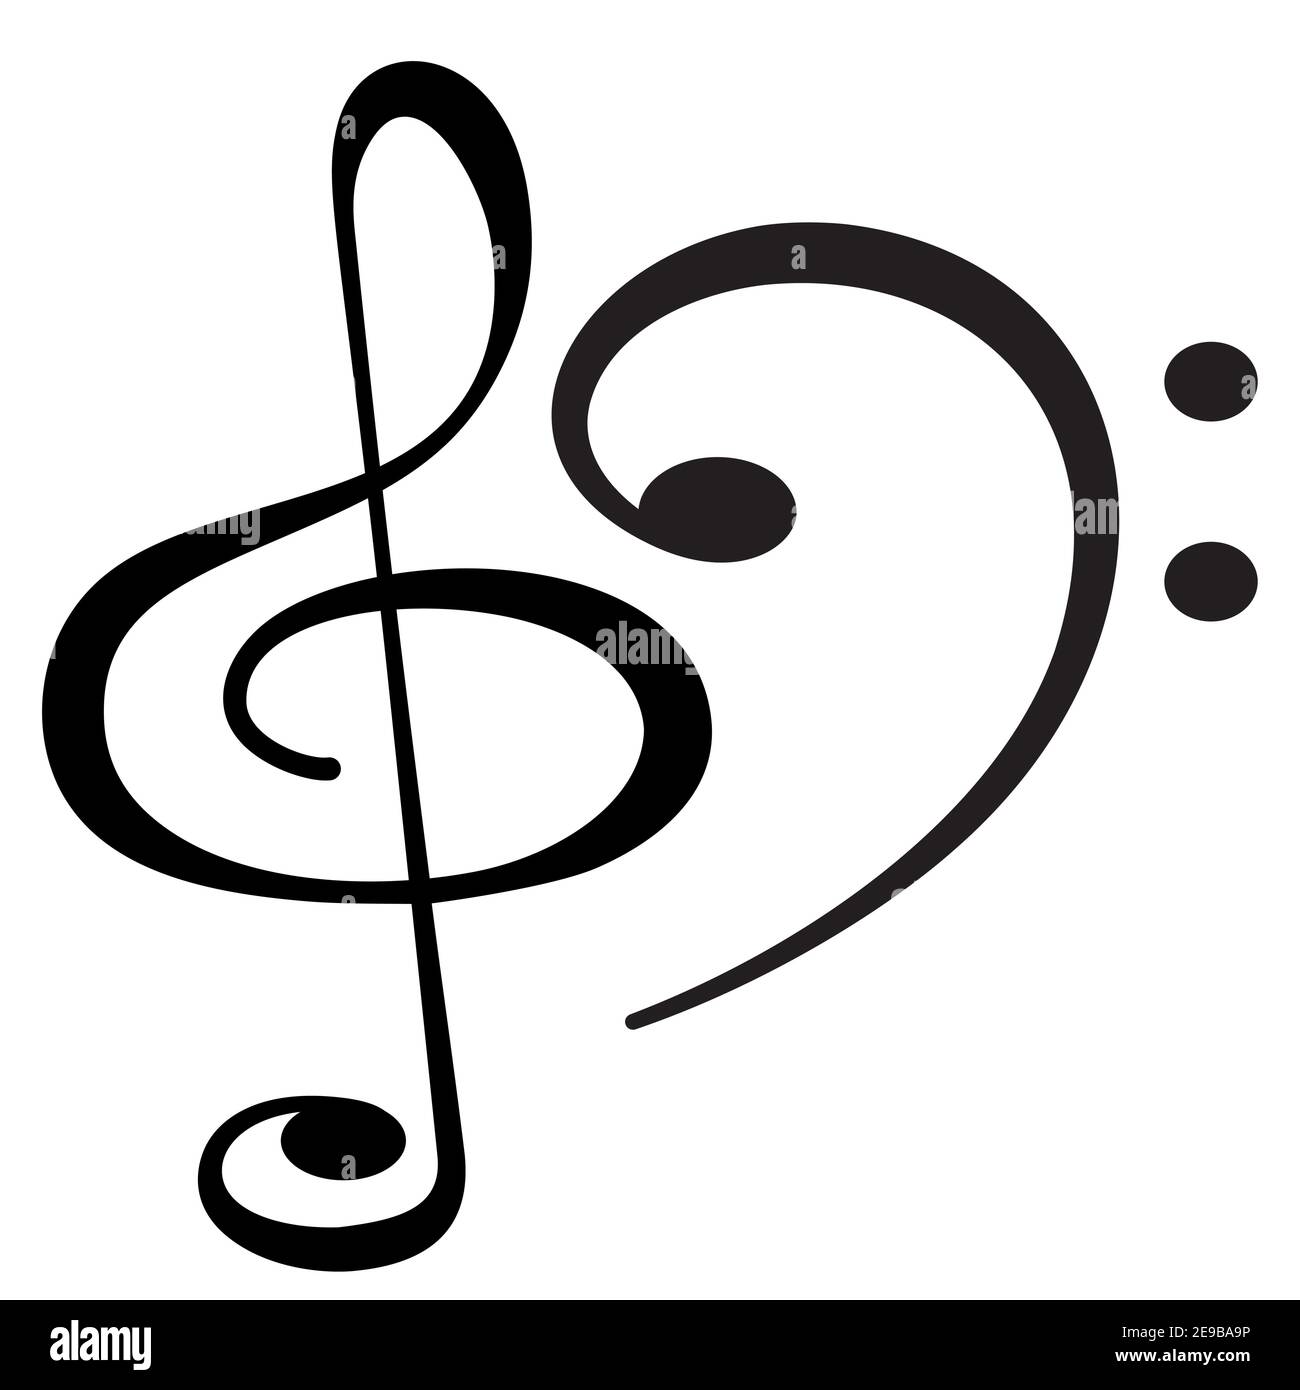 Illustration of the musical clef symbols Stock Vector